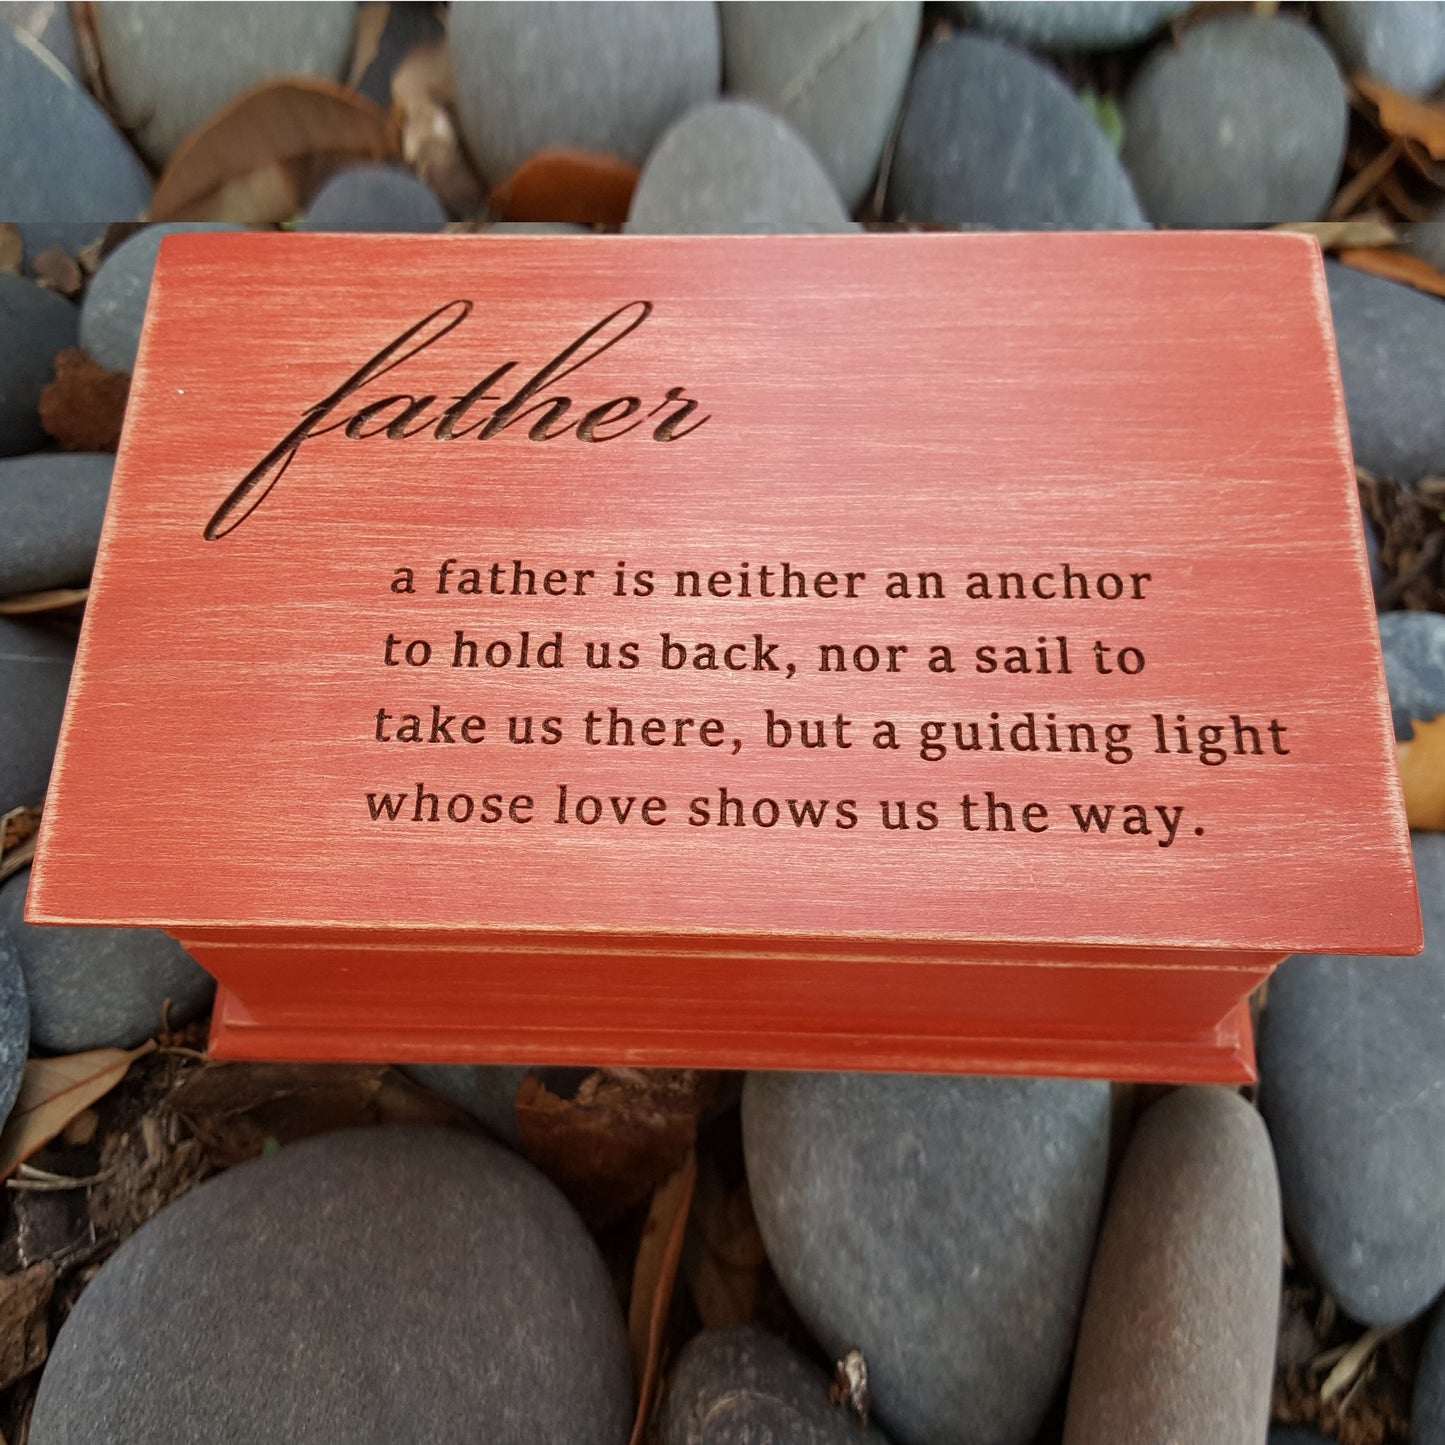 Father quote keepsake box with built in music player